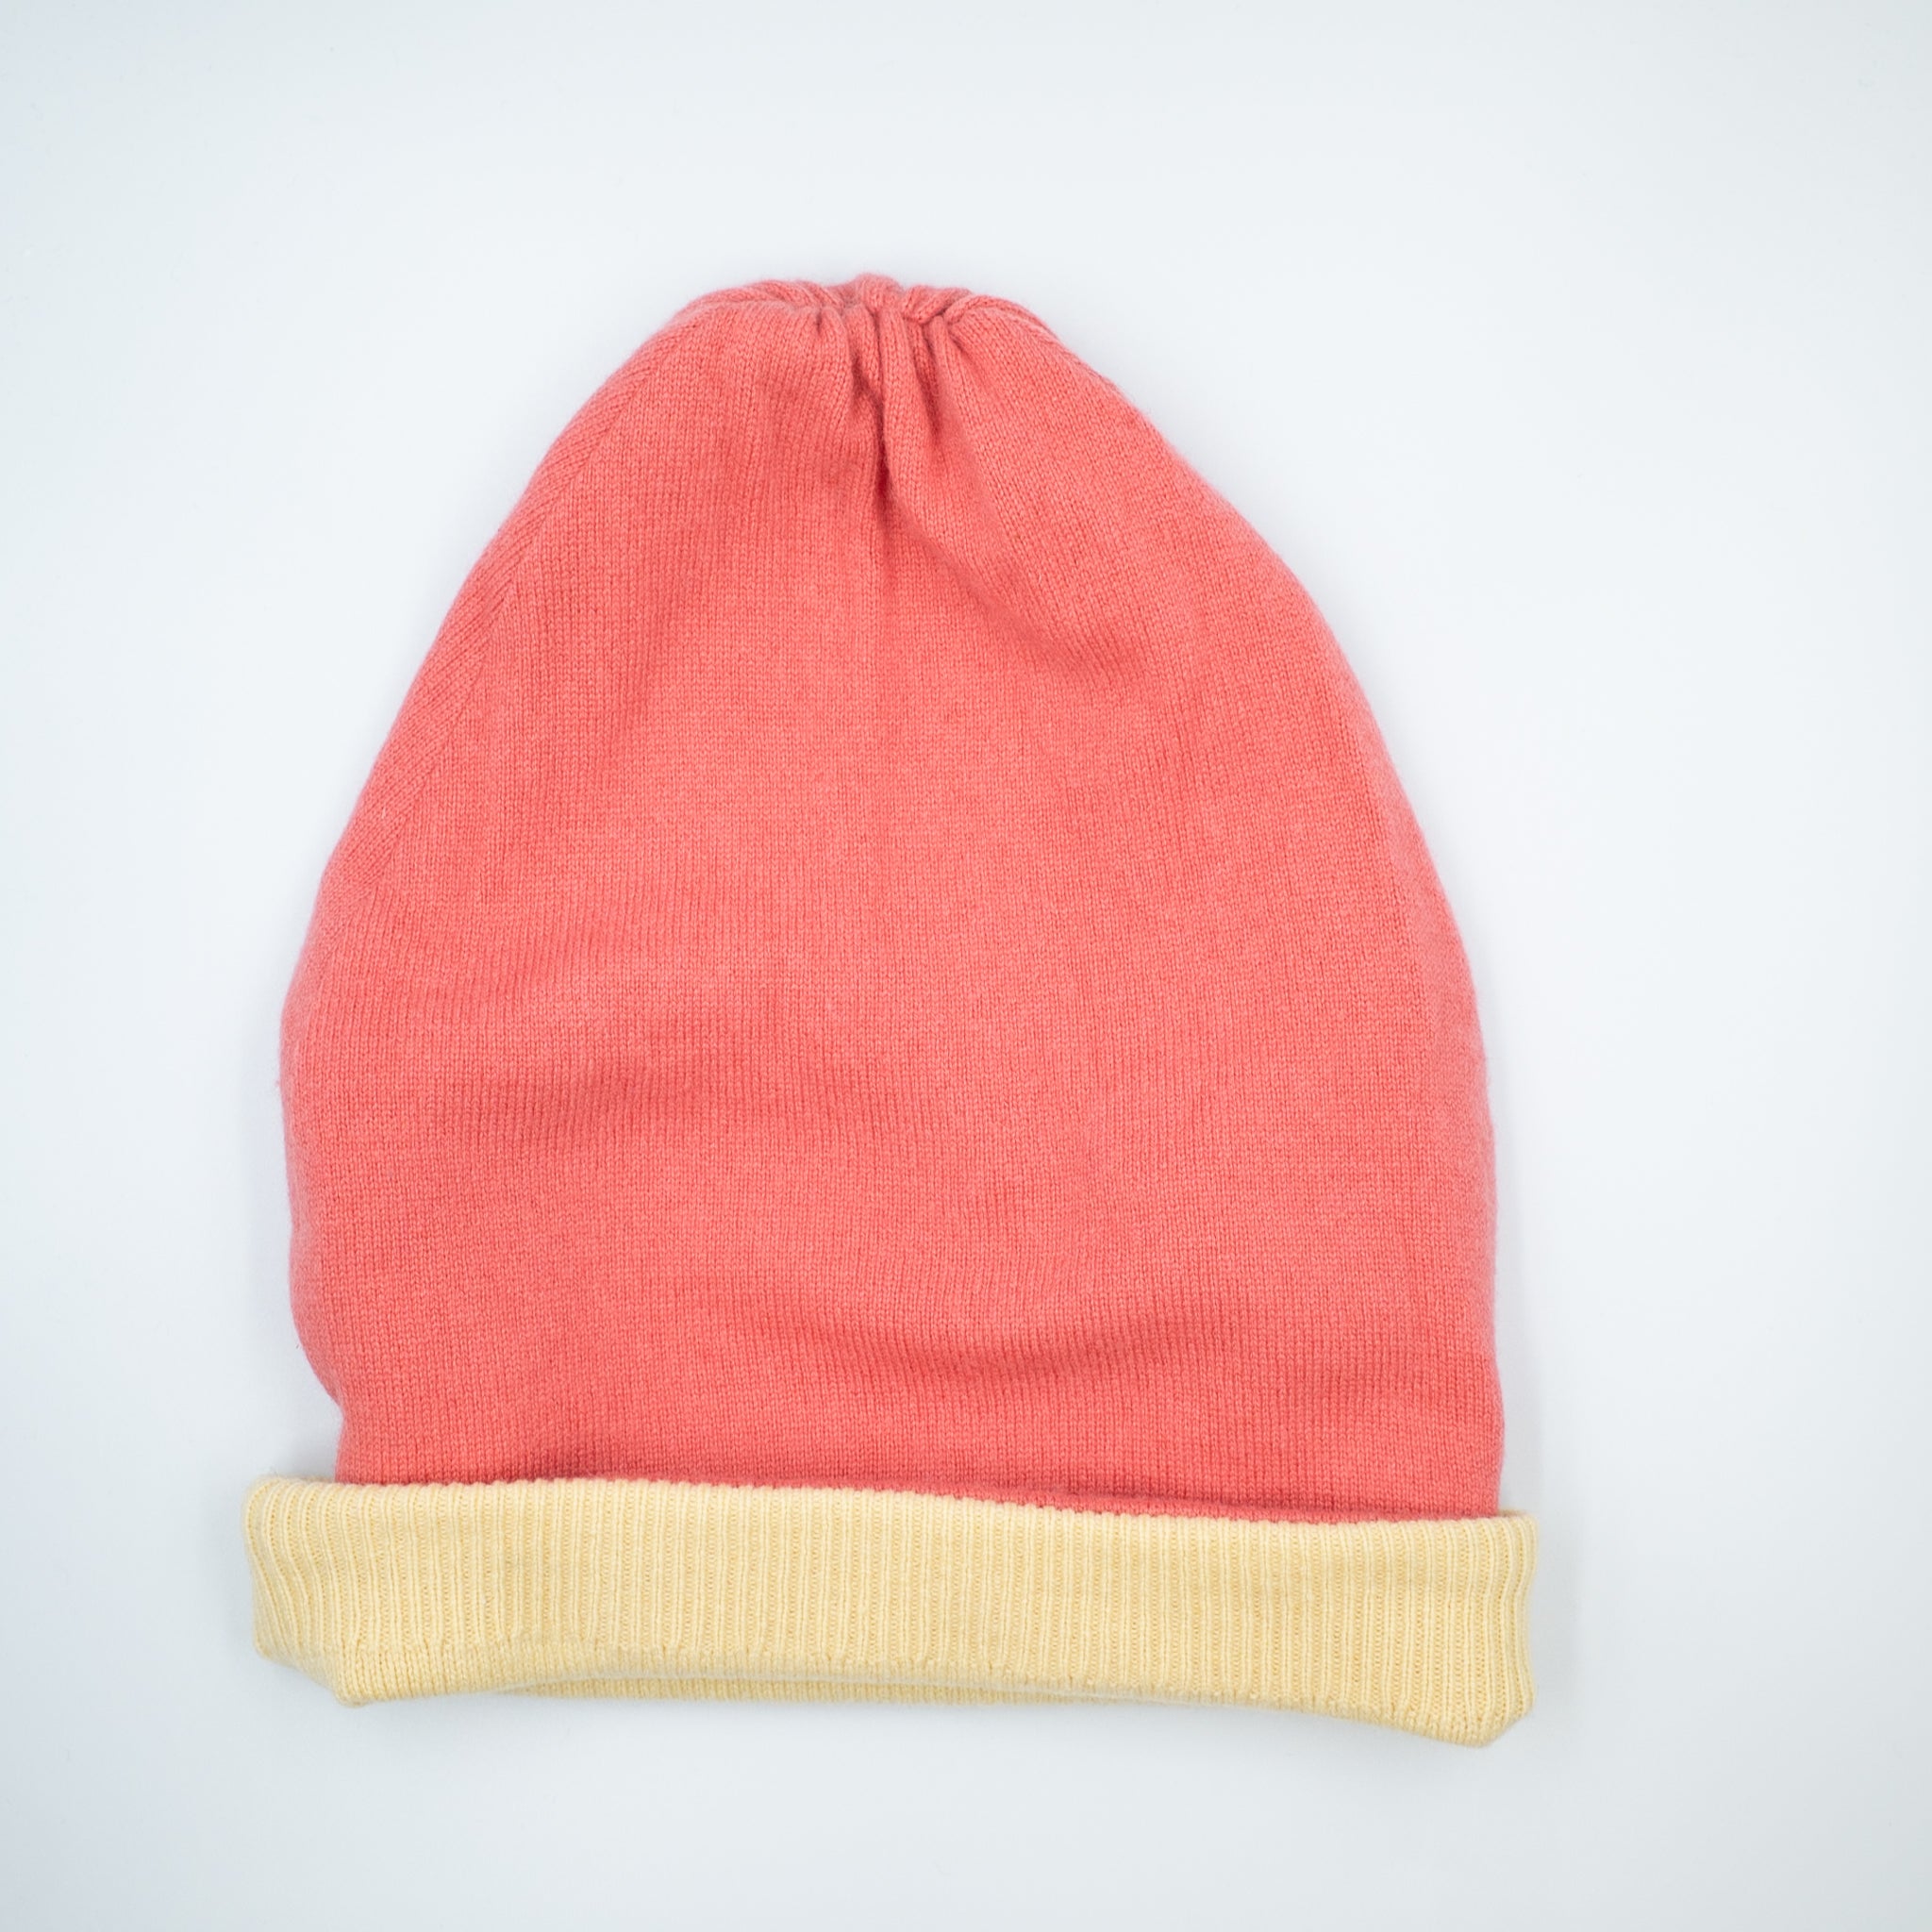 Coral and Lemon Reversible Slouchy Beanie Hat